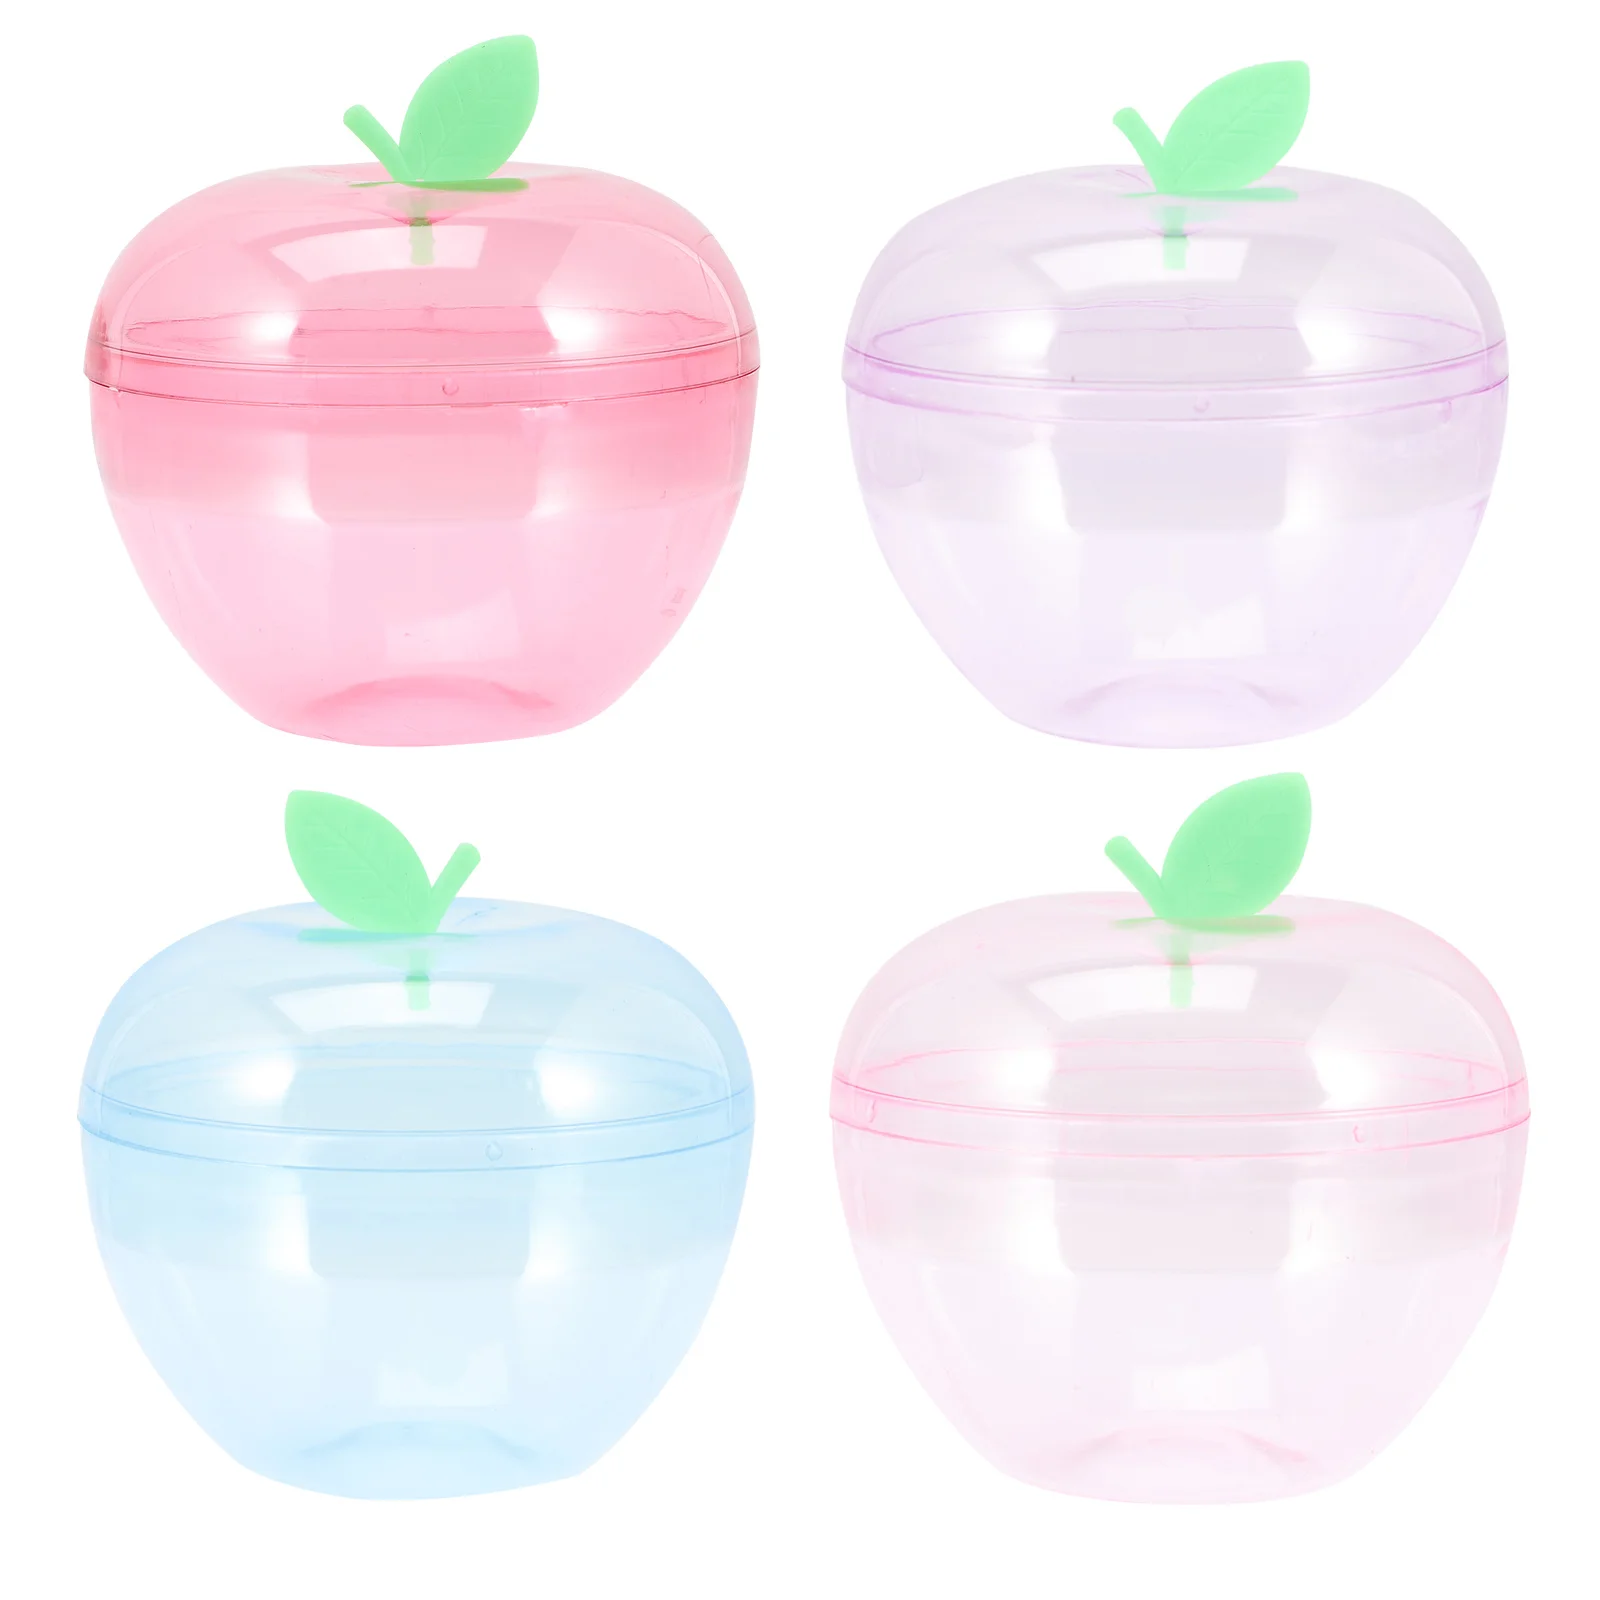 

Boxes Box Apple Container Storage Candy Treat Shapedcontainers Jewelry Party Wedding Giftapples Birthday Favor Seasonal Holiday